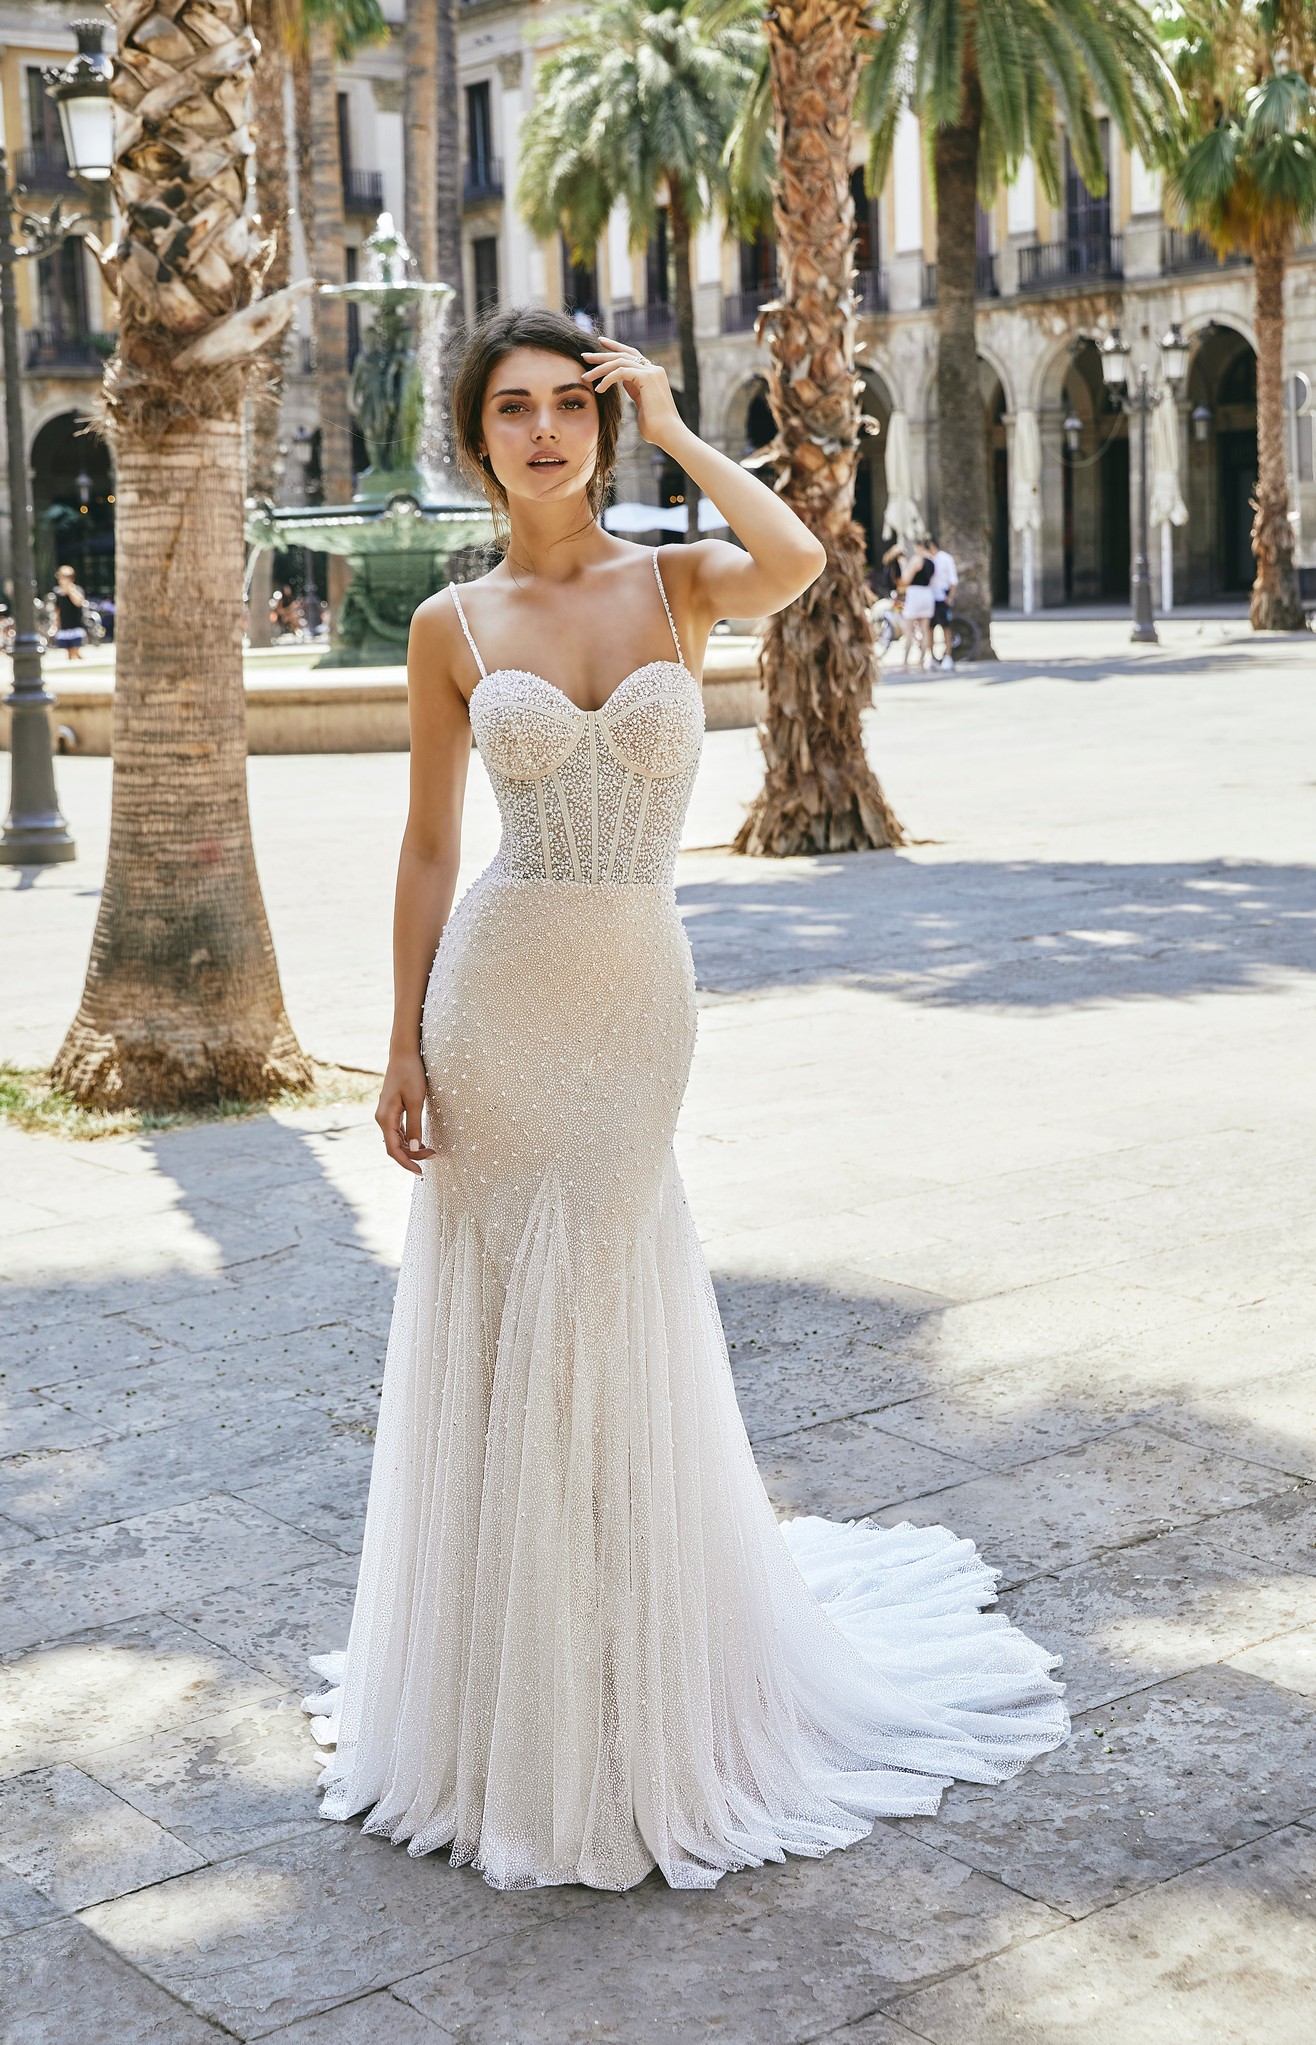 A brunette model stood in a sunny street by exotic trees in Ronald Joyce 69712, an ivory and champagne exquisitely pearl-beaded fit and flare wedding dress with delicate straps and glitter tulle